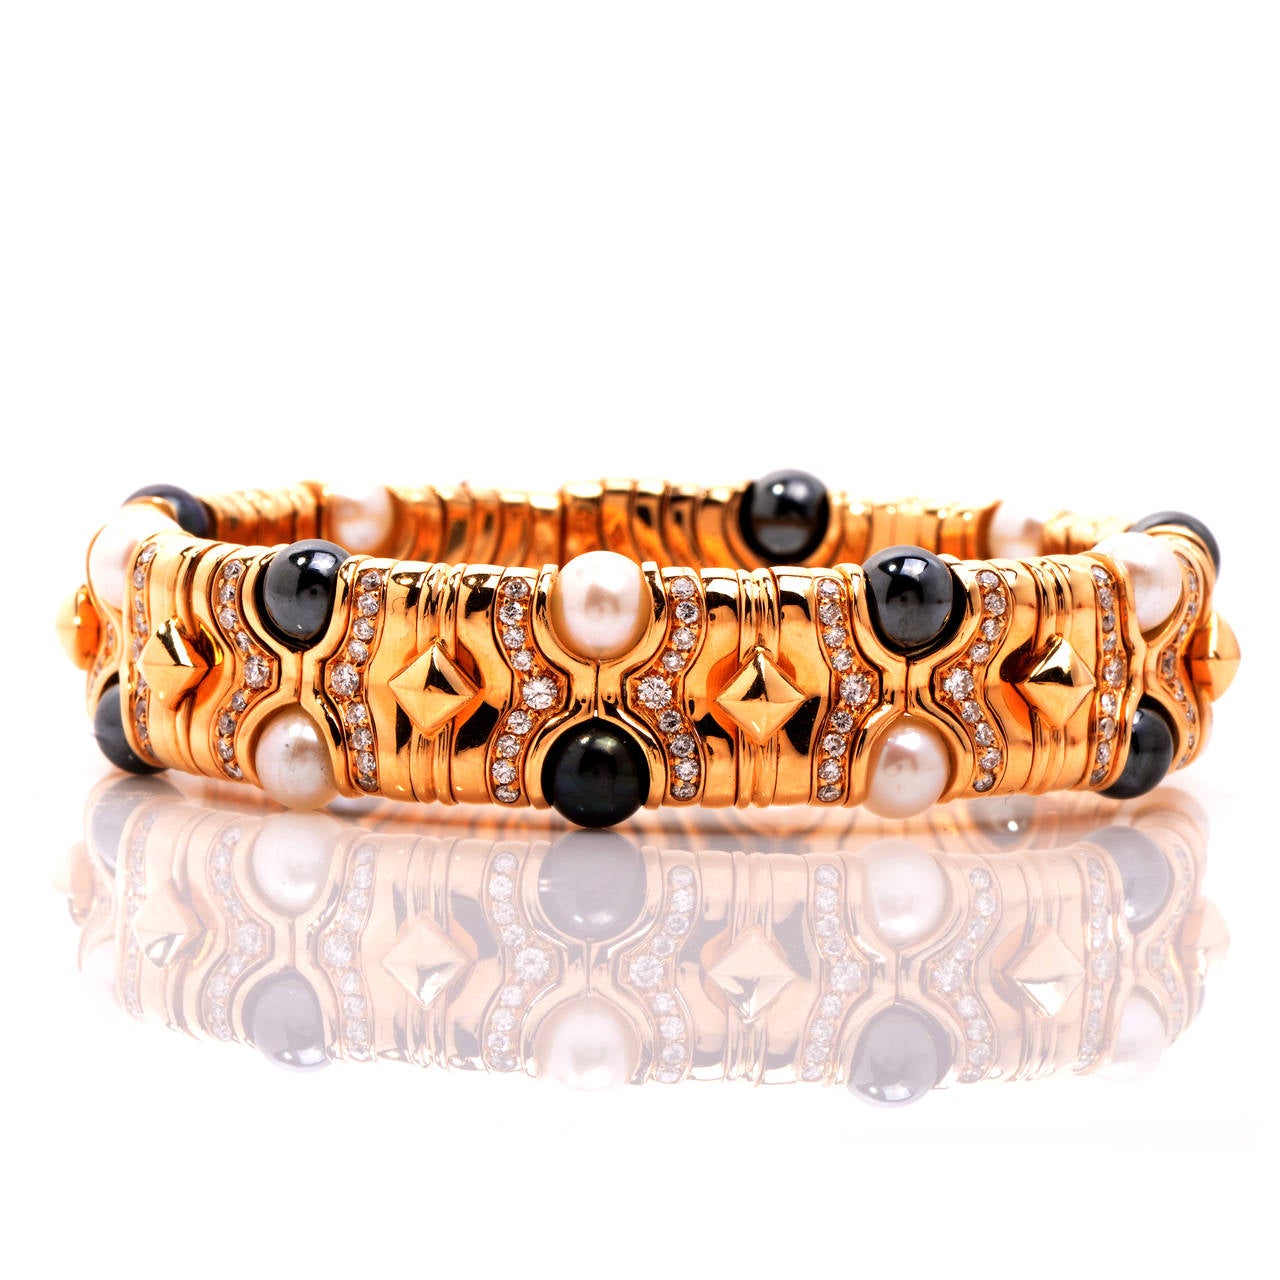 Full of sophistication, elegance and glamour this stunning and exquisitely detailed Bulgari cuff bracelet is a treasure to own! Bulgari is known for gracefully combining the classic with the contemporary, transcending time and trends. Finely crafted